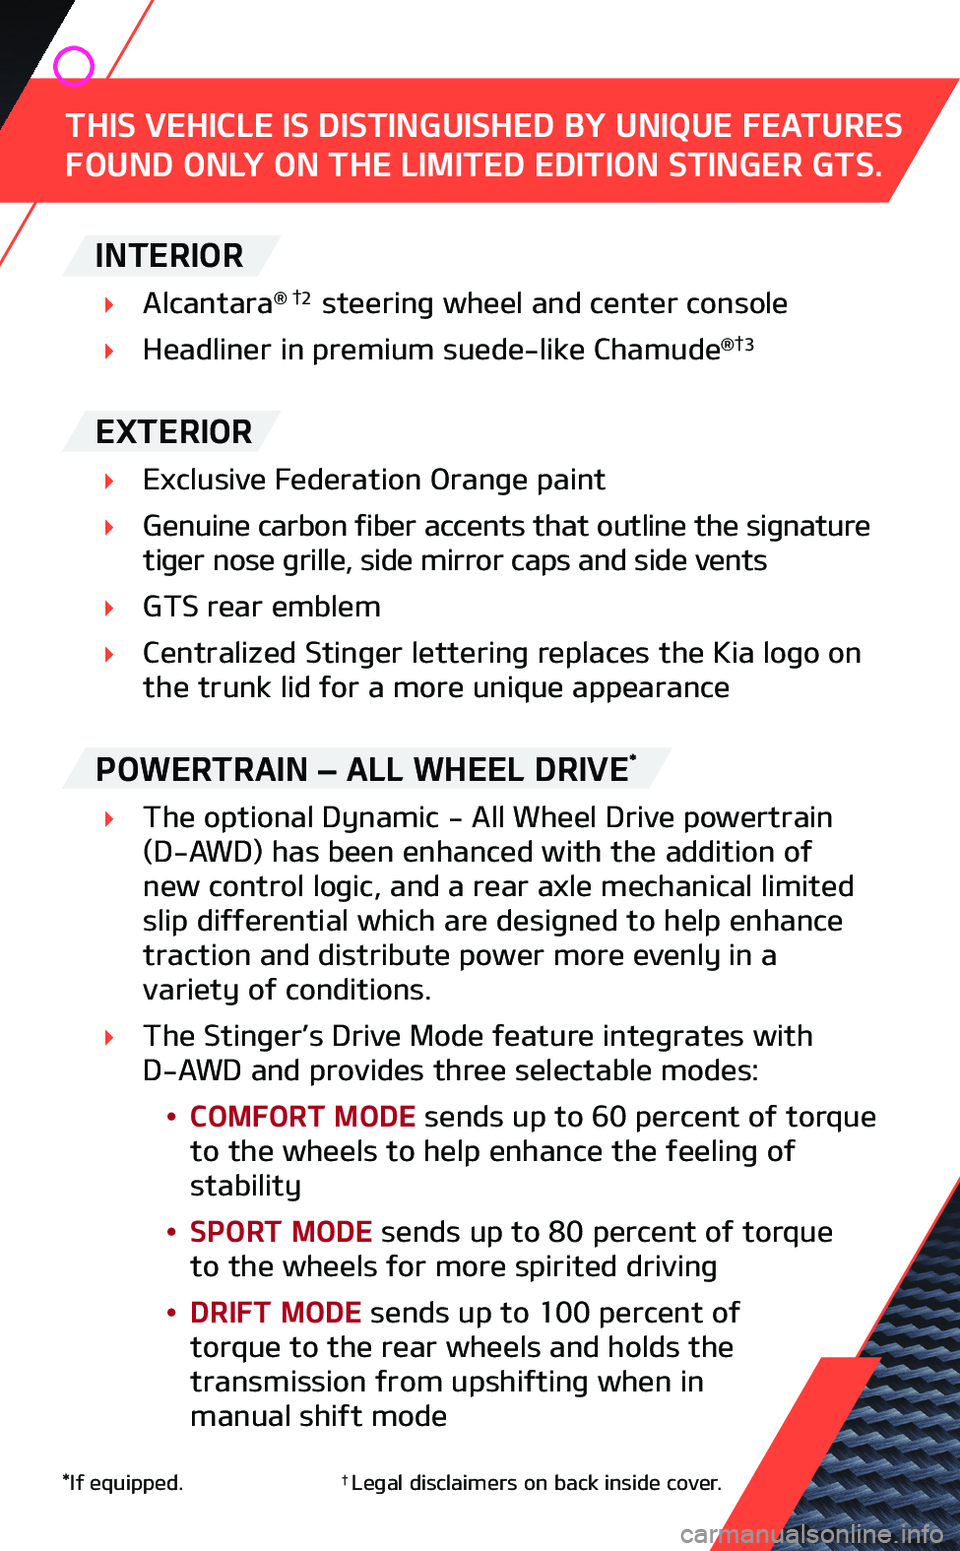 KIA STINGER 2019  Performance Features THIS VEHICLE IS DISTINGUISHED BY UNIQUE FEATURES FOUND ONLY ON THE LIMITED EDITION STINGER GTS.
POWERTRAIN – ALL WHEEL DRIVE*
4 The optional Dynamic - All Wheel Drive powertrain (D-AWD) has been enh